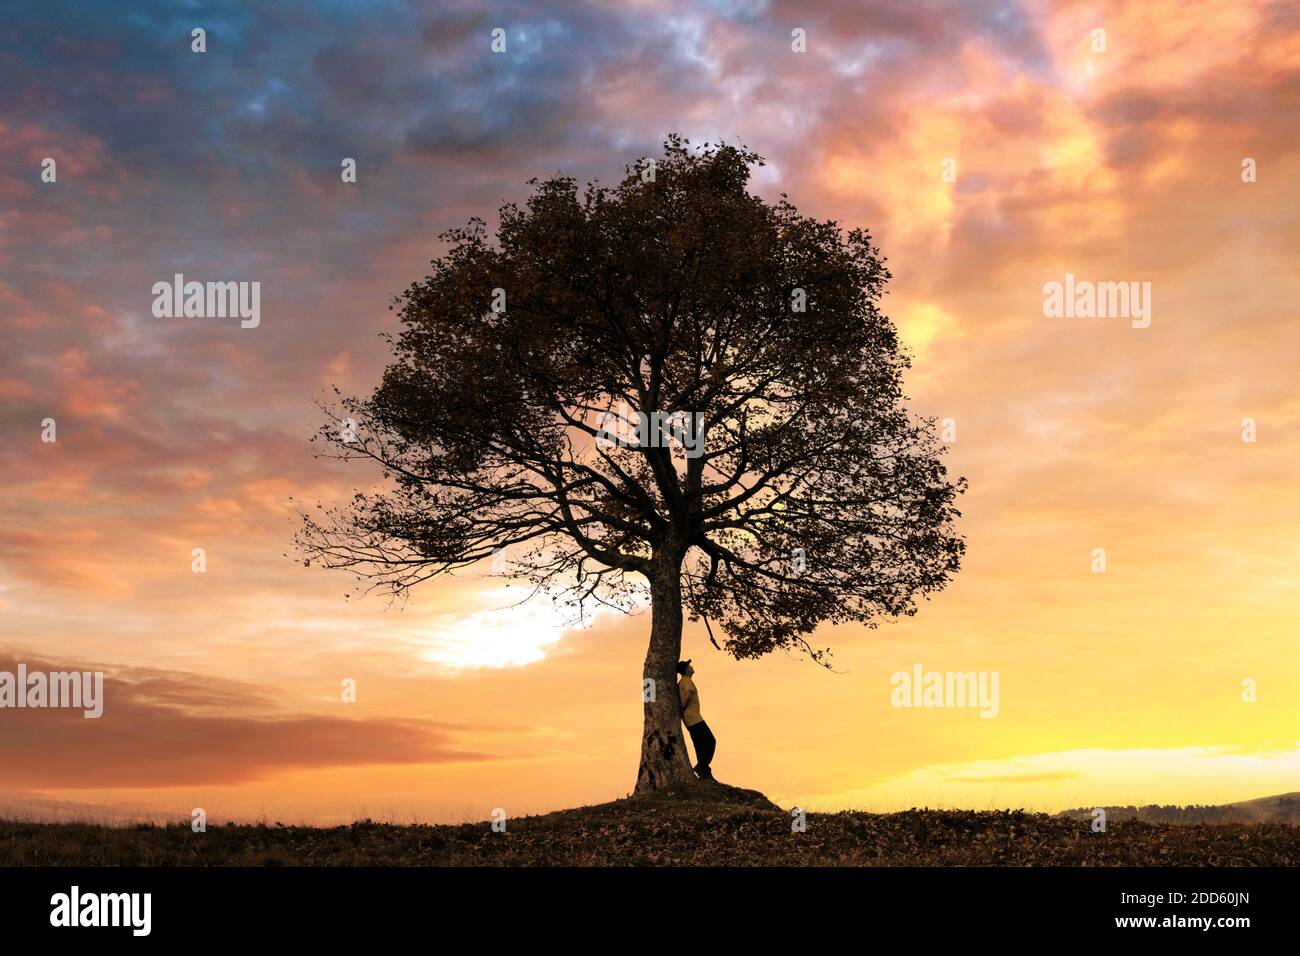 Silhouette of tourist under majestic tree at evening mountains meadow at sunset. Dramatic colorful scene with clear orange sky. Landscape photography Stock Photo